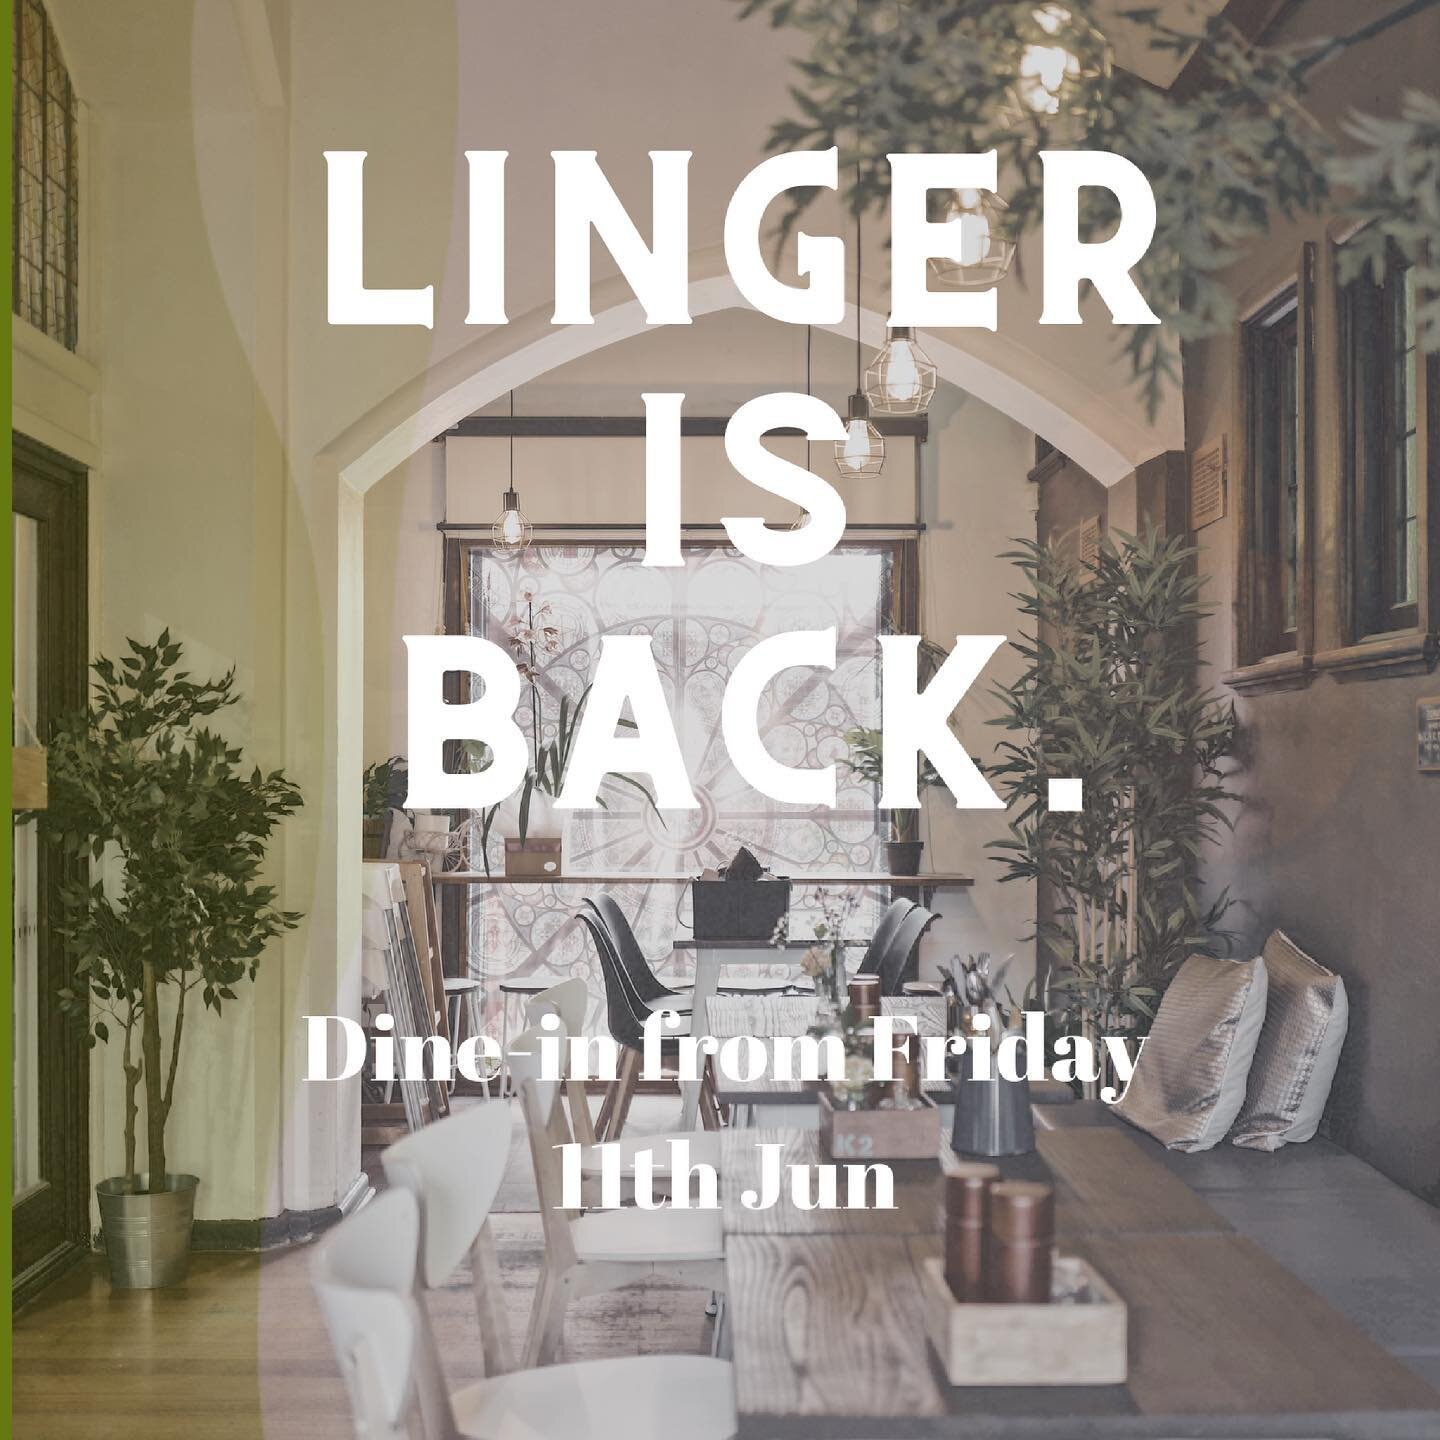 We&rsquo;re relieved and excited to announce that linger will be back for dine-in from tomorrow! 
It&rsquo;s been a whirlwind 2 weeks, thank you for all your support. 
Hit us up this long weekend- we will be open on Monday 8am-3pm! Booking are strong